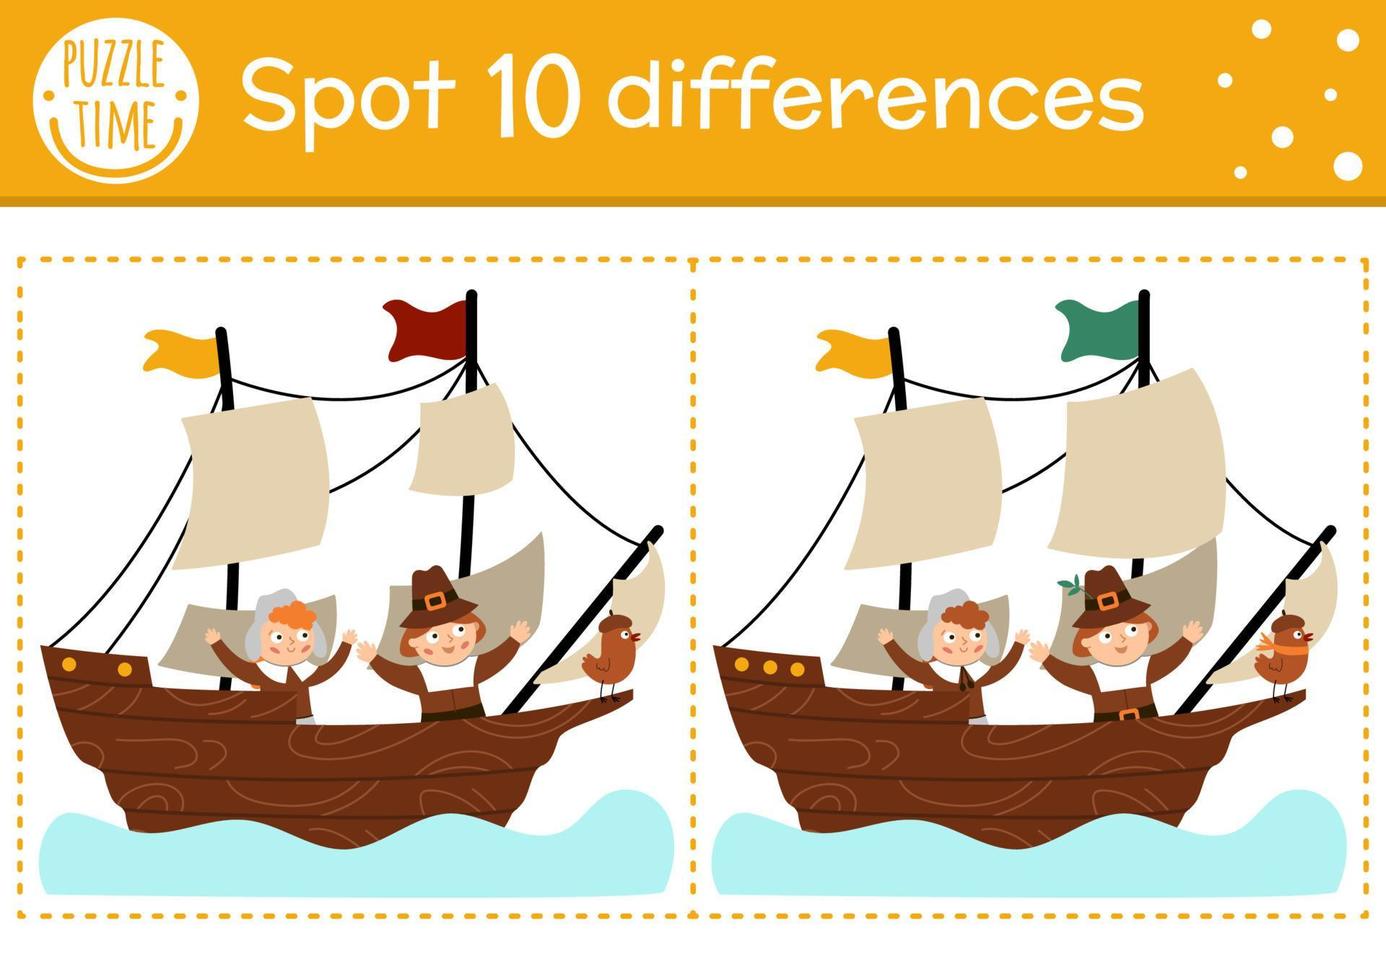 Find differences game for children. Thanksgiving educational activity with pilgrims sailing on a ship. Printable worksheet. Autumn historical holiday puzzle for kids. Fall preschool sheet vector